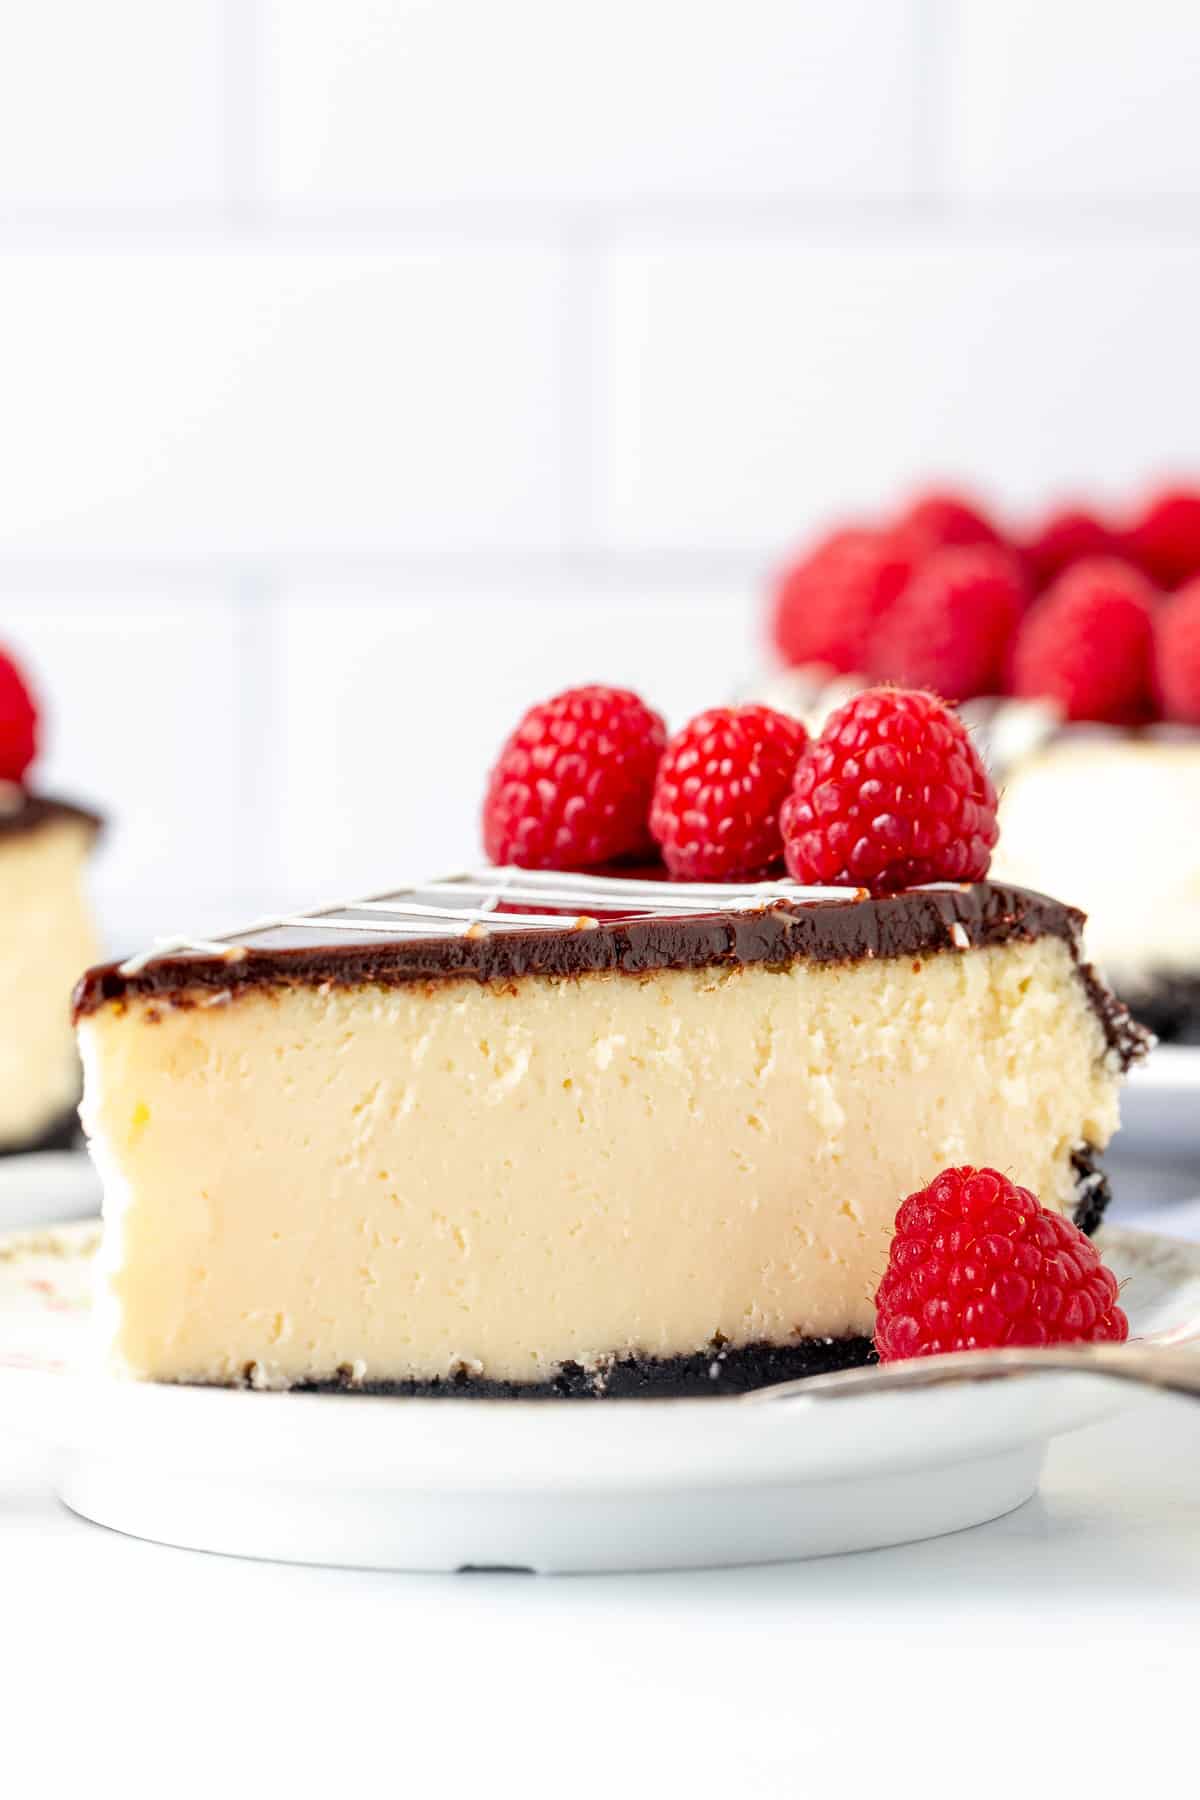 Slice of white chocolate cheesecake with Oreo crust and chocolate topping